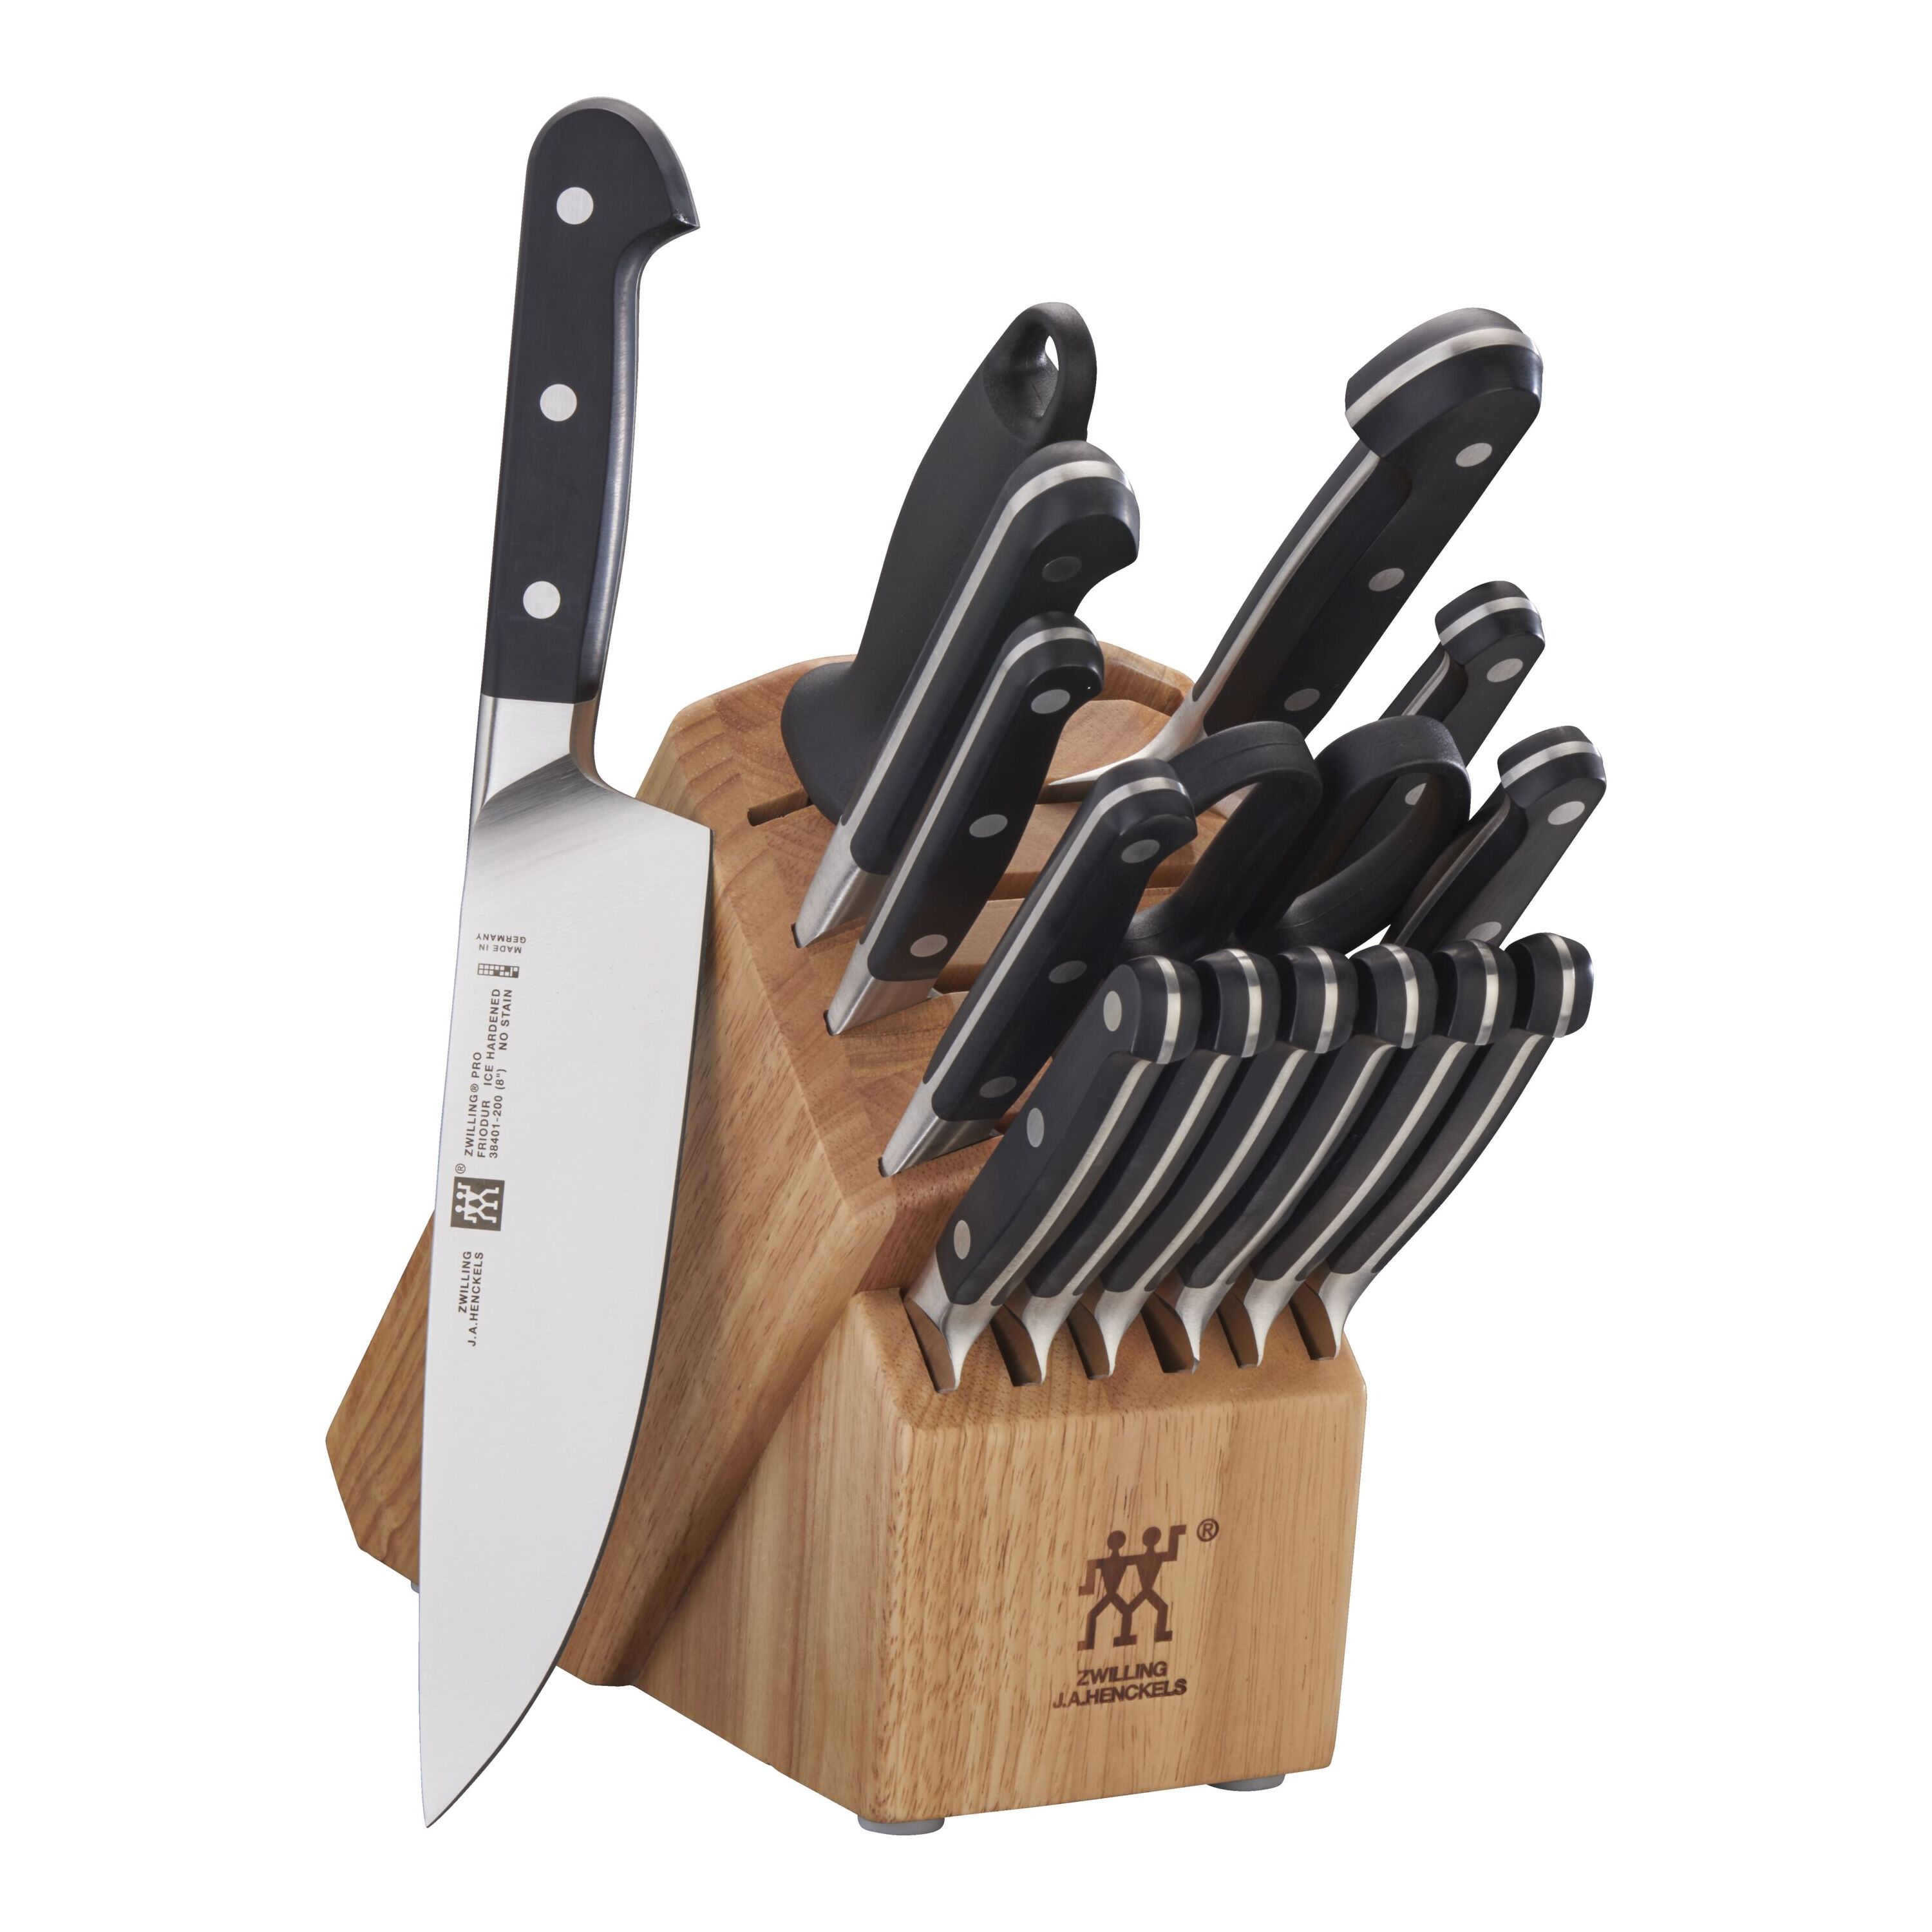 We Found 5 of the Best Kitchen Knife Sets on Sale at Zwilling